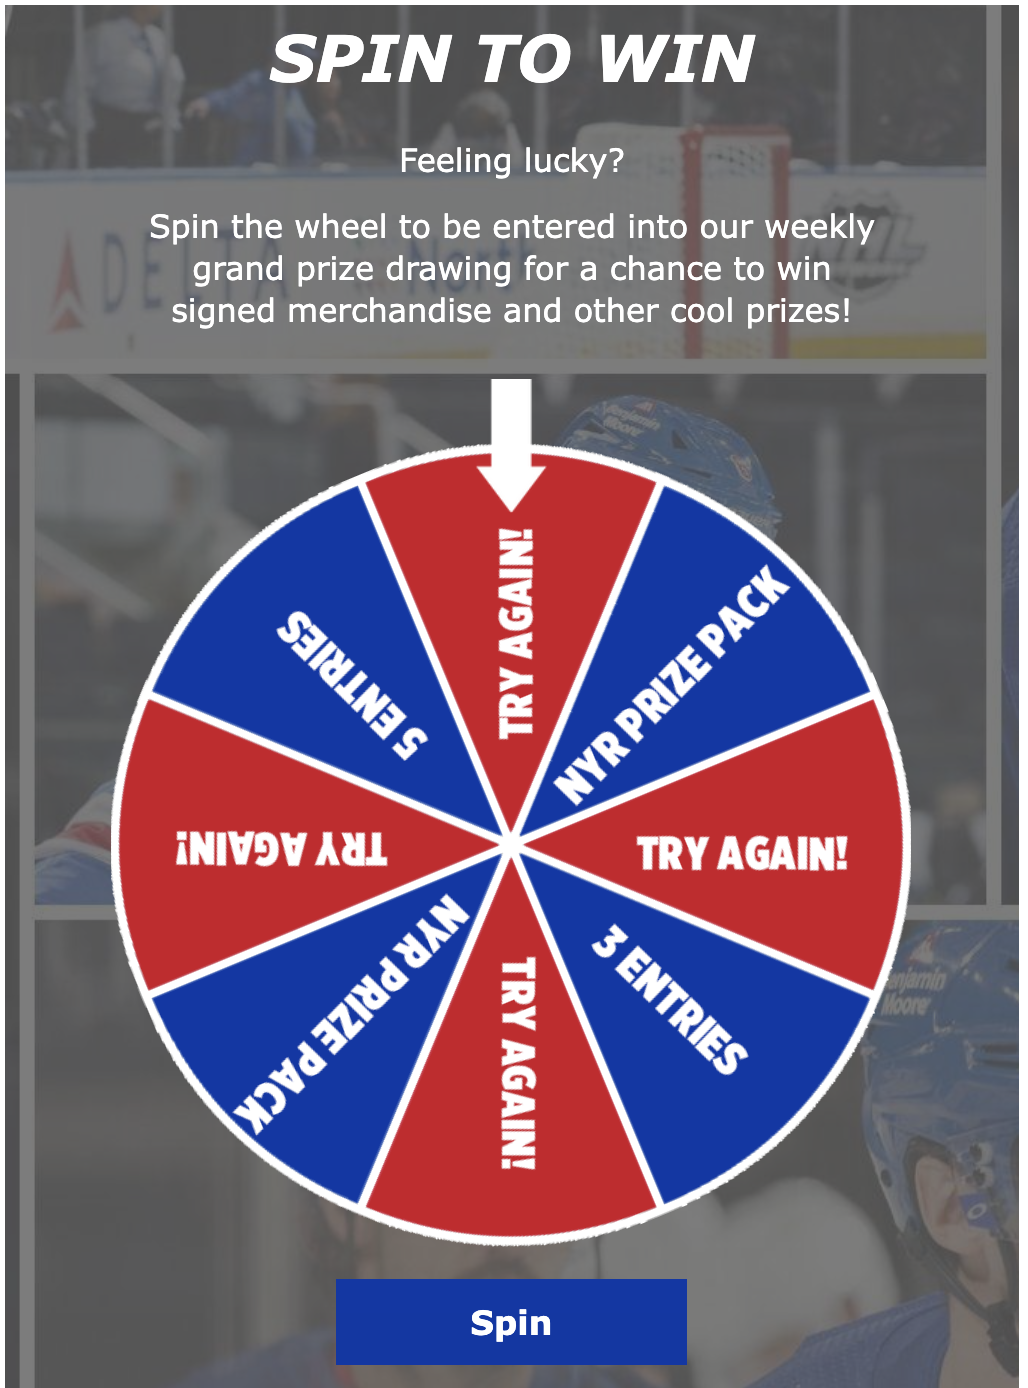 Spin to win prize wheel